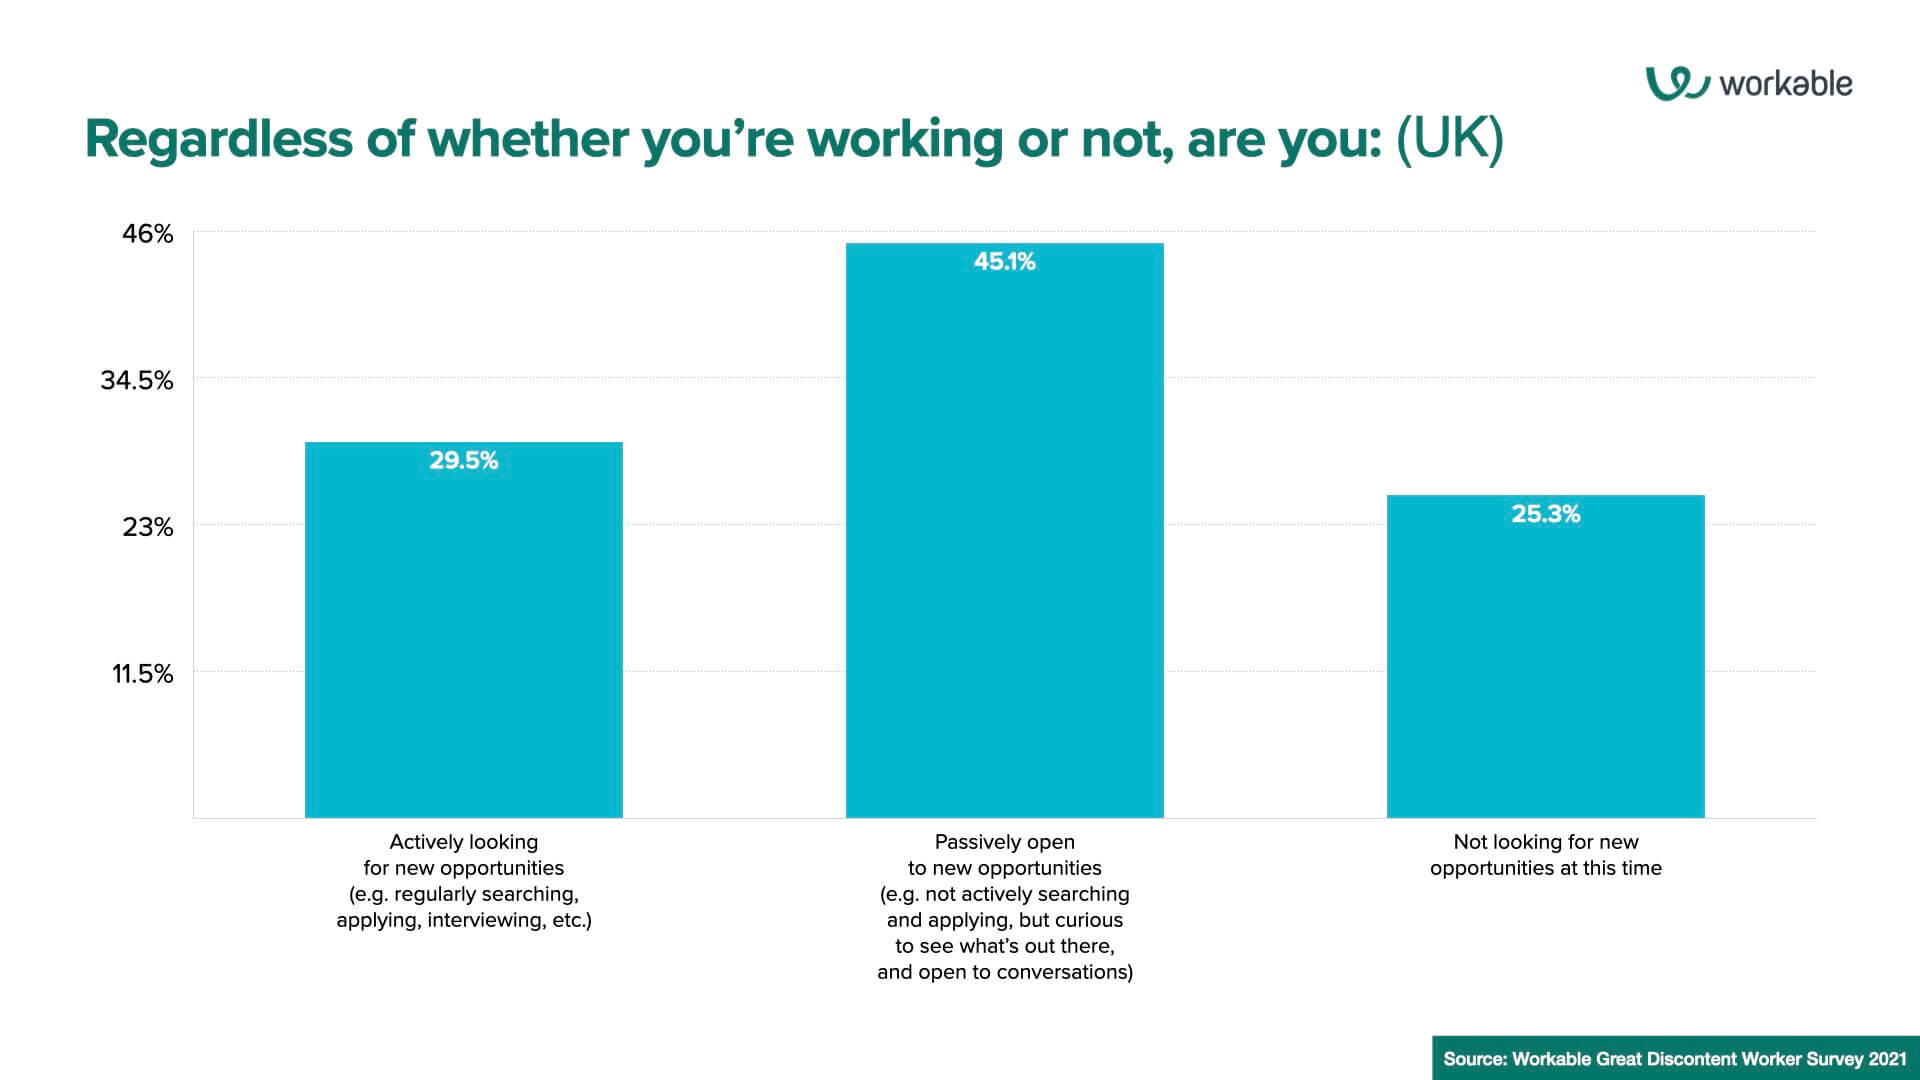 Great Discontent: Regardless of whether you’re working or not, are you: (UK)